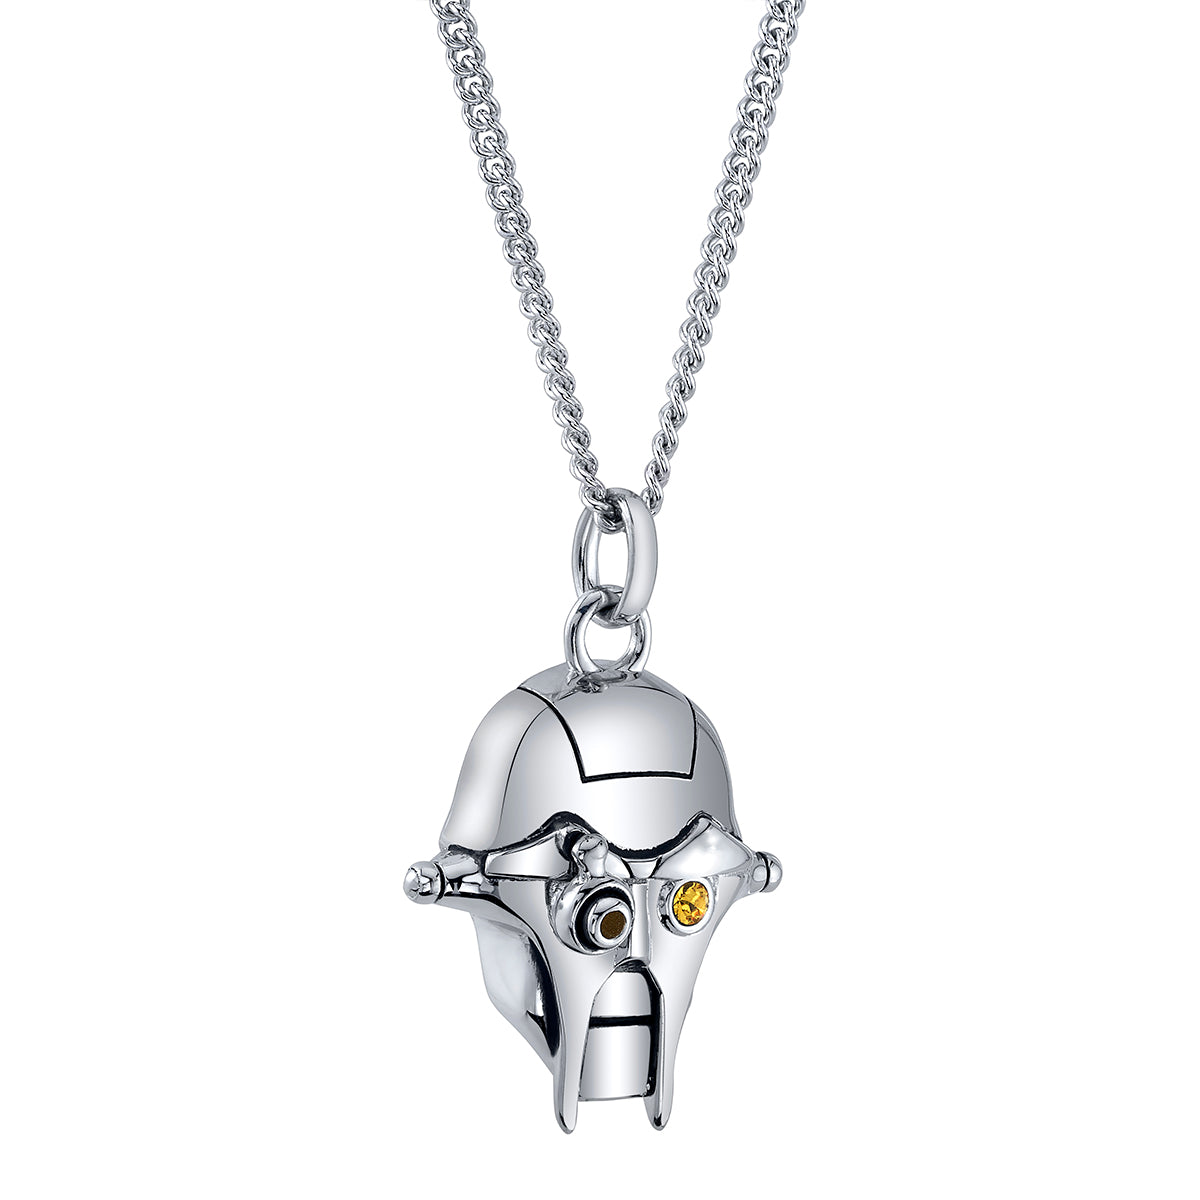 Star Wars The Mandalorian Diamond Necklace 1/10 ct tw Sterling Silver 18